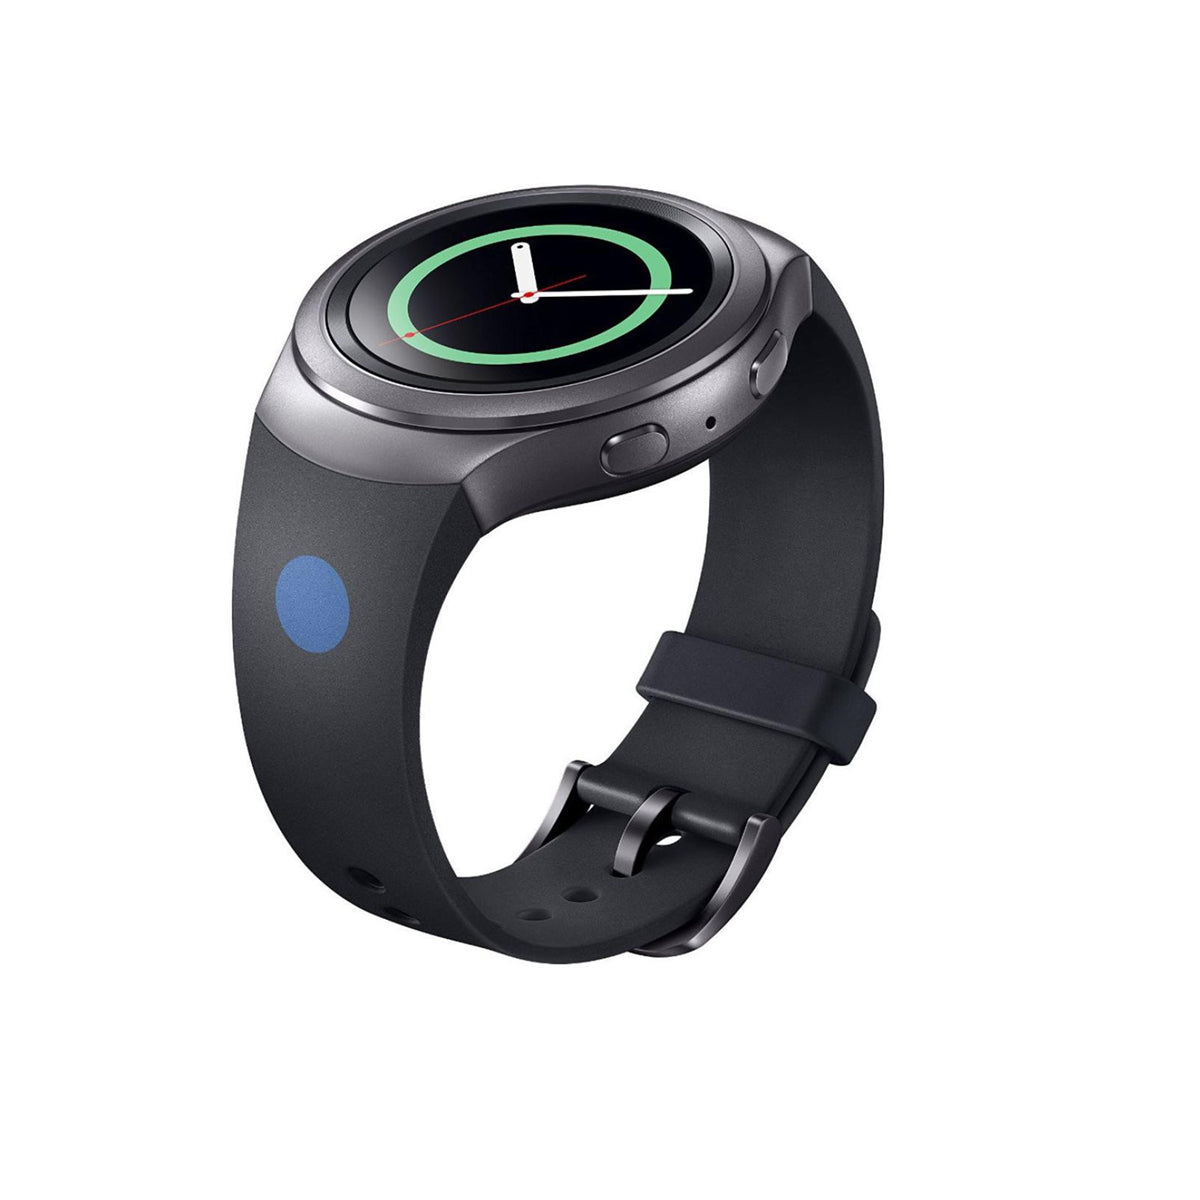 Designer Samsung Gear S2 Replacement Band Straps   